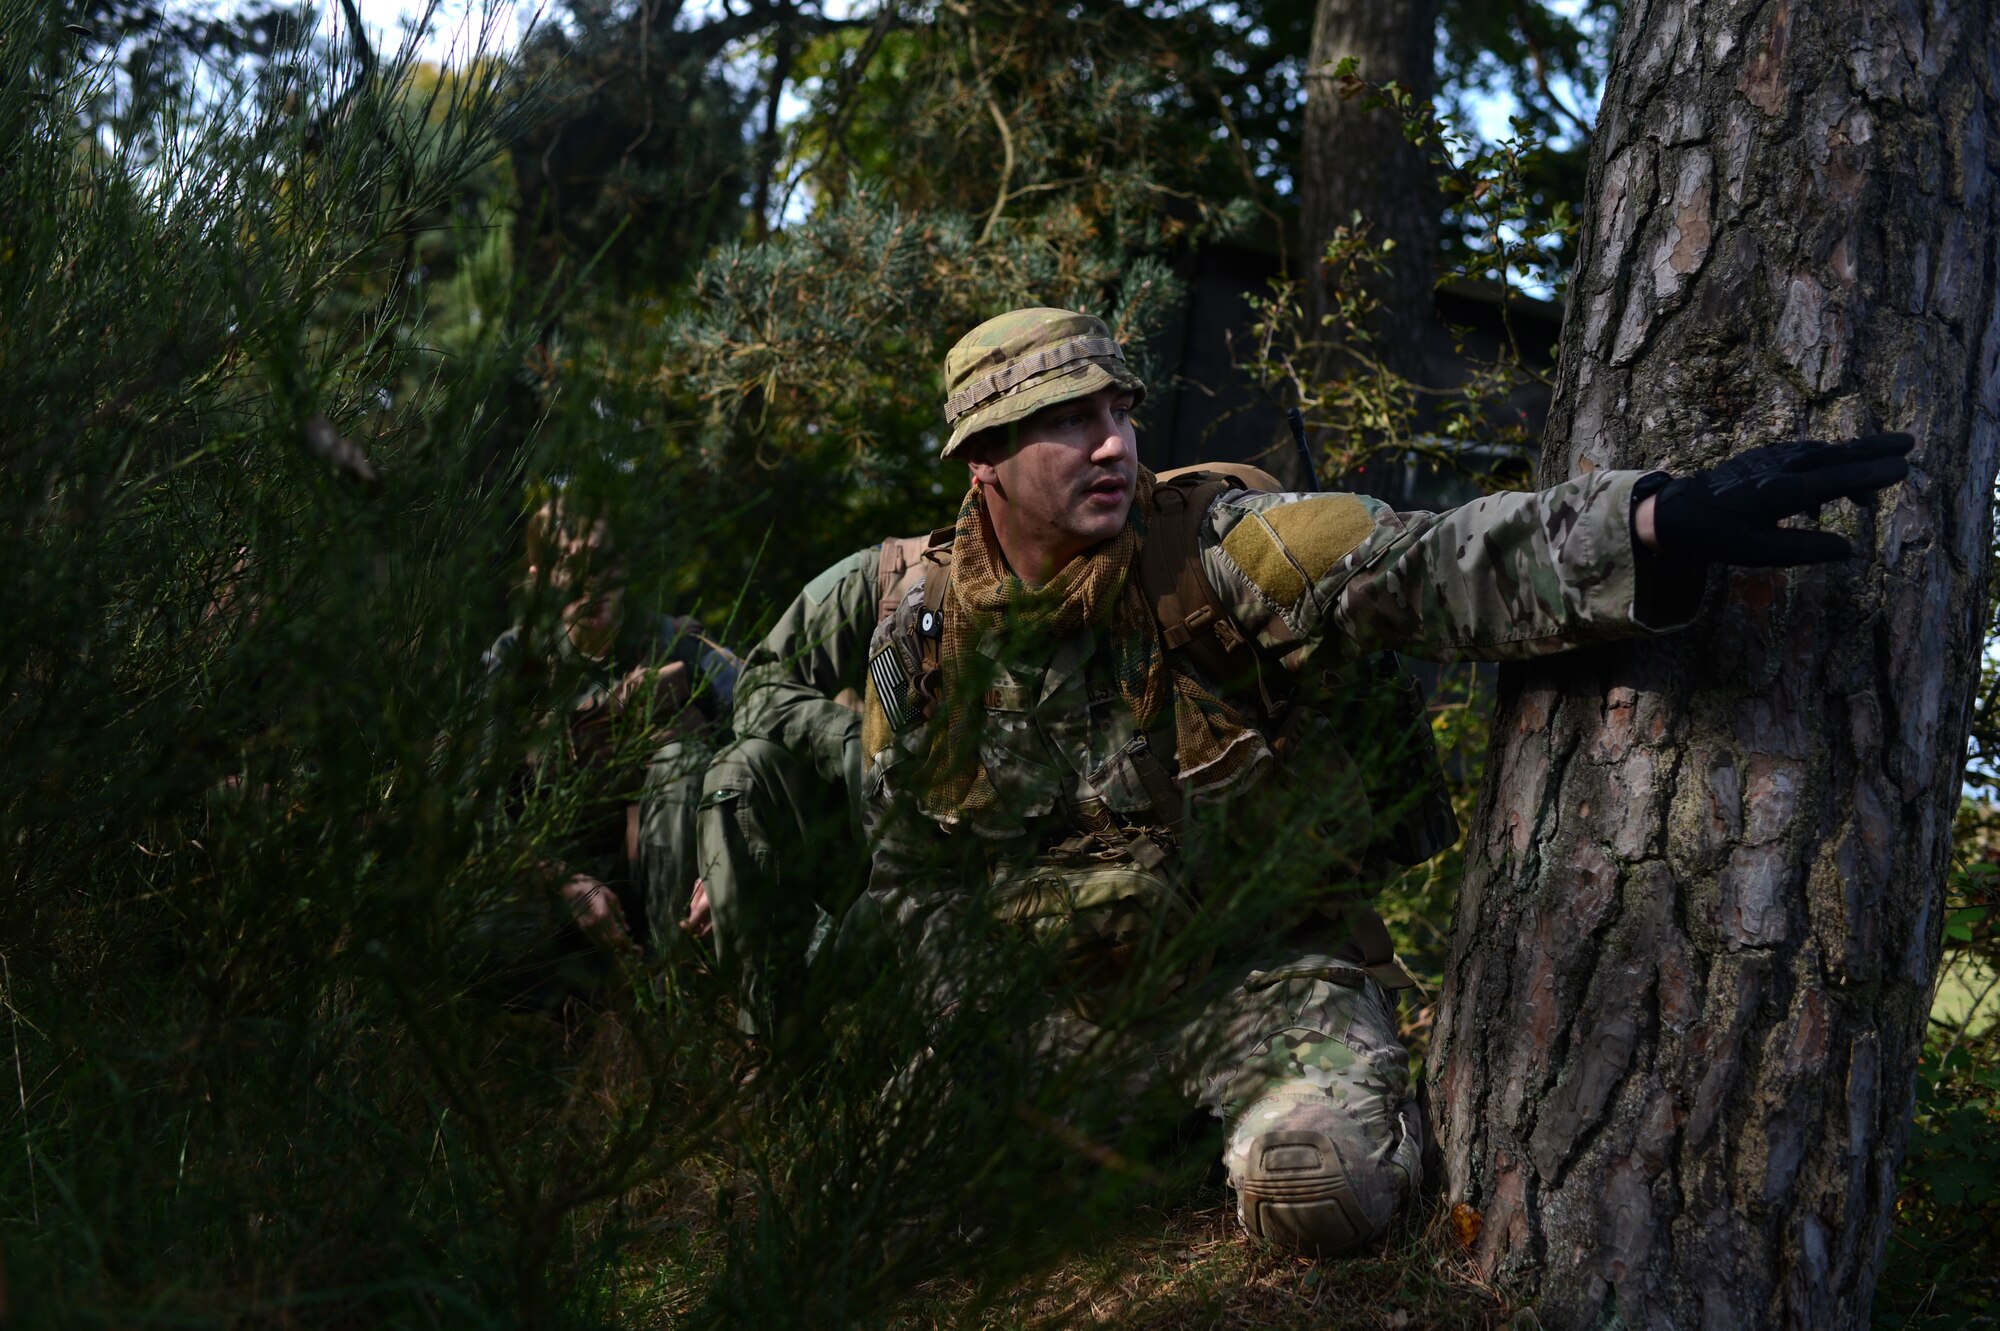 U.S. Air Force Tech. Sgt. John Long, 52nd Operations Support Squadron survival, evasion, resistance and escape NCO in charge of weapons and tactics, directs a group of pilots during combat survival training on a range in Baumholder, Germany, Sept. 30, 2014. Long facilitated training where pilots practiced survival techniques involving both weather complications and different detention circumstances. (U.S. Air Force photo by Senior Airman Gustavo Castillo/Released) 